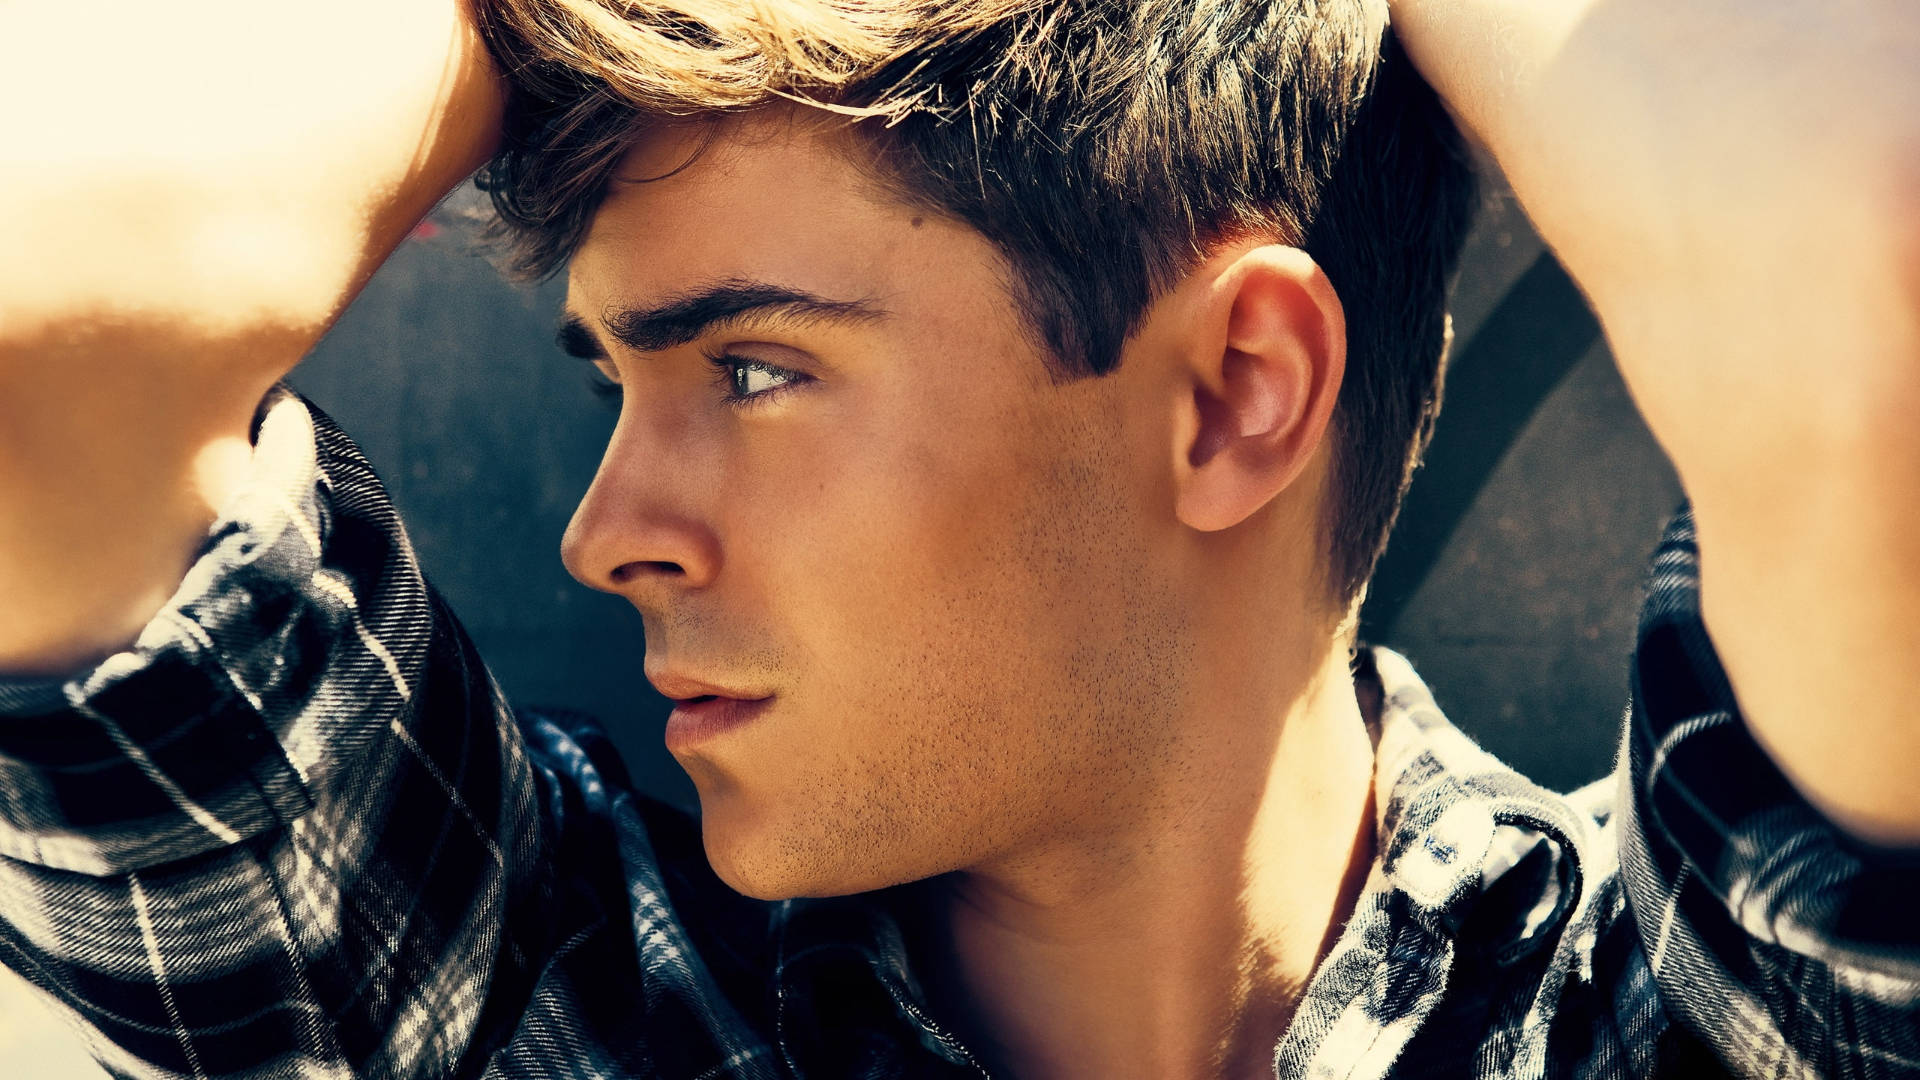 Zac Efron Looking Young And Dashing In A Black T-shirt. Background